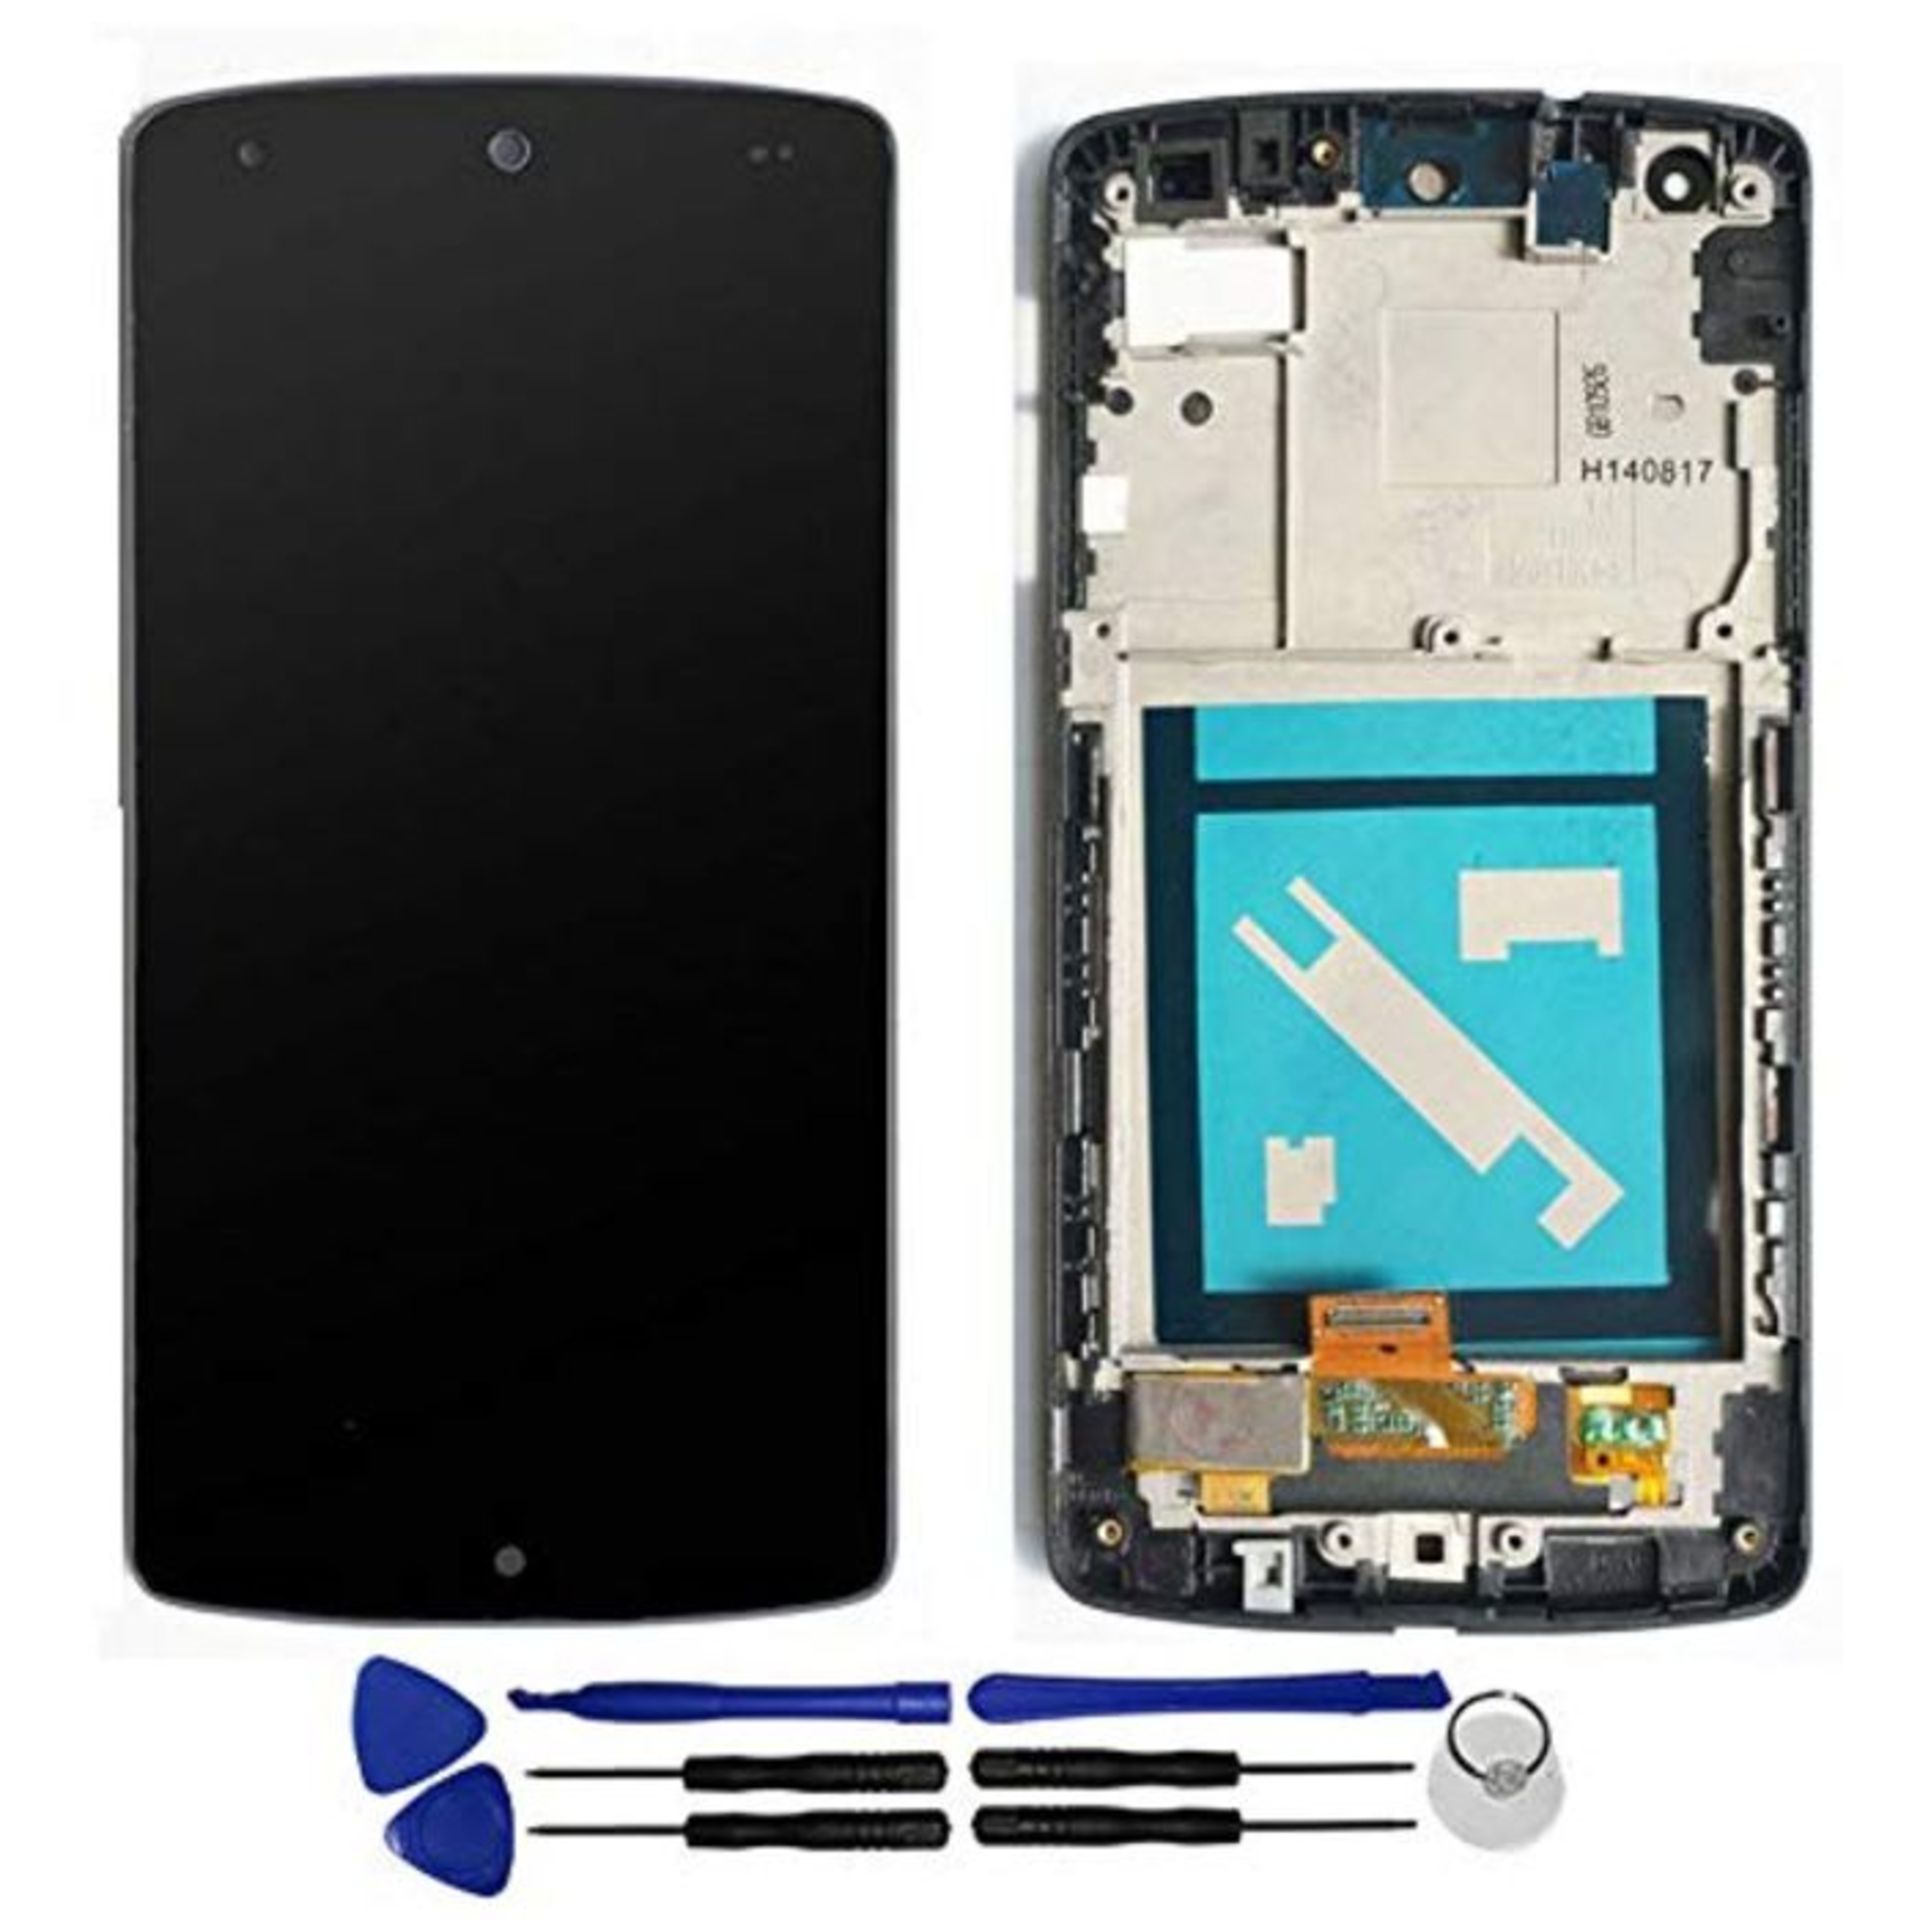 OYOG Replacement for LG Google Nexus 5 D820 Touch Screen Digitizer Assembly LCD Displa